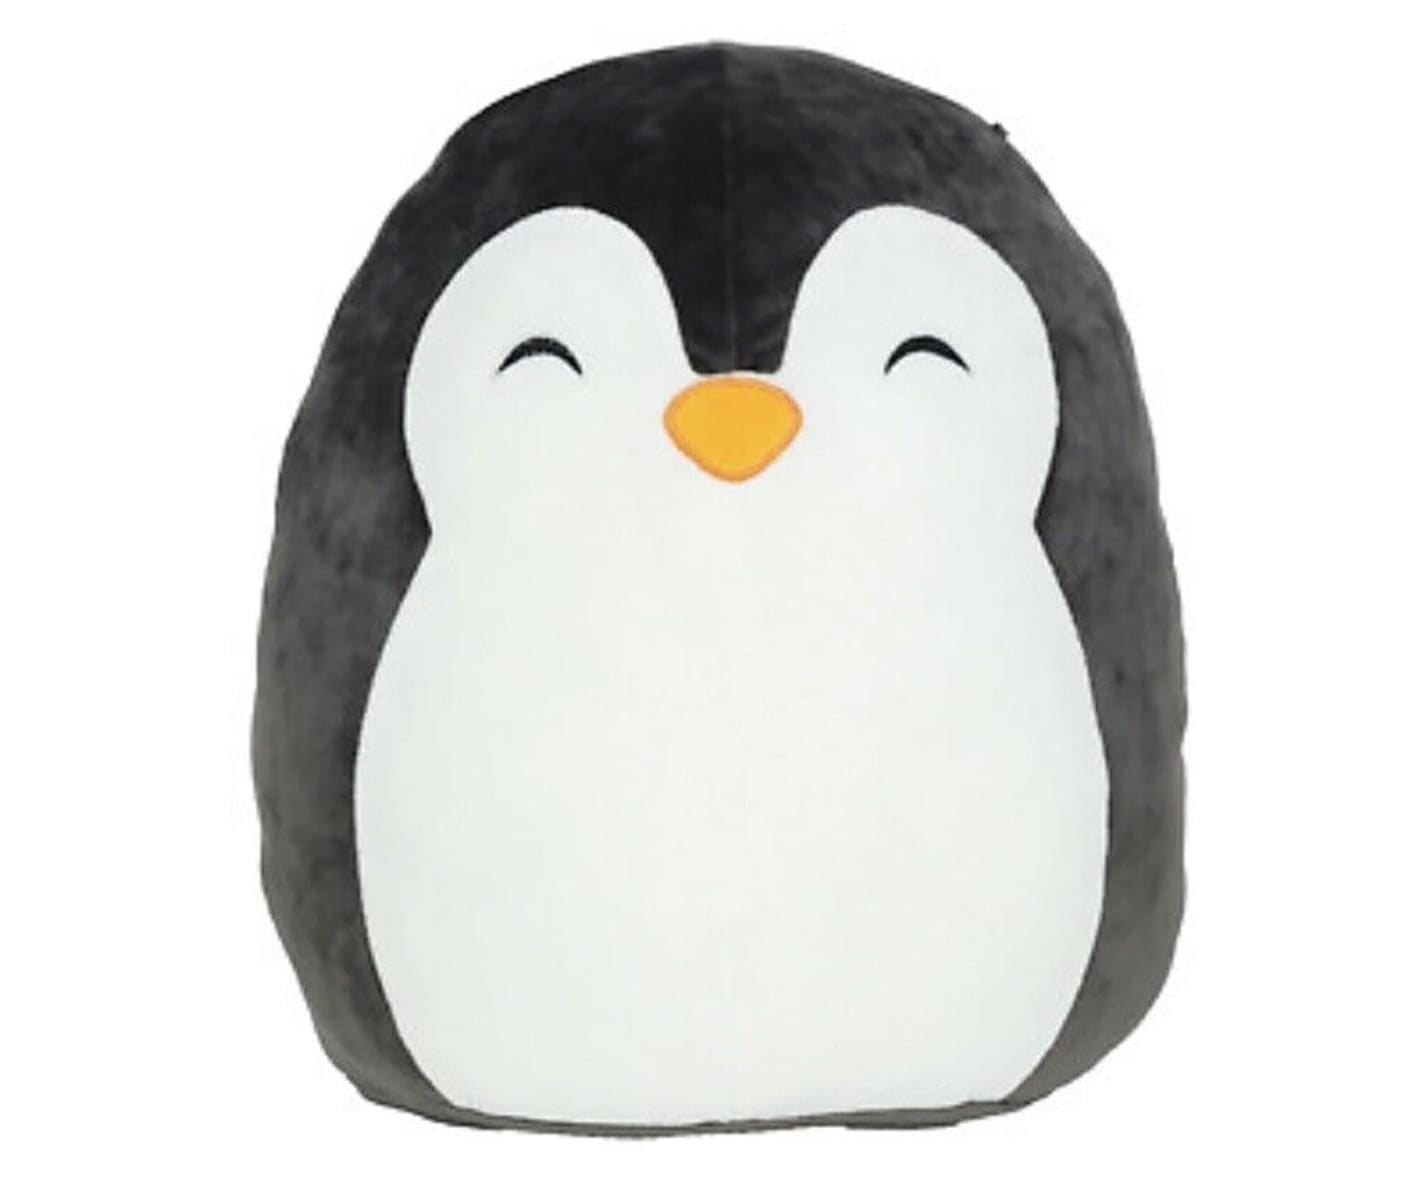 5" Inch Squishmallow Tanner Penguin plush animal toy NEW Kellytoy LAST ONE 